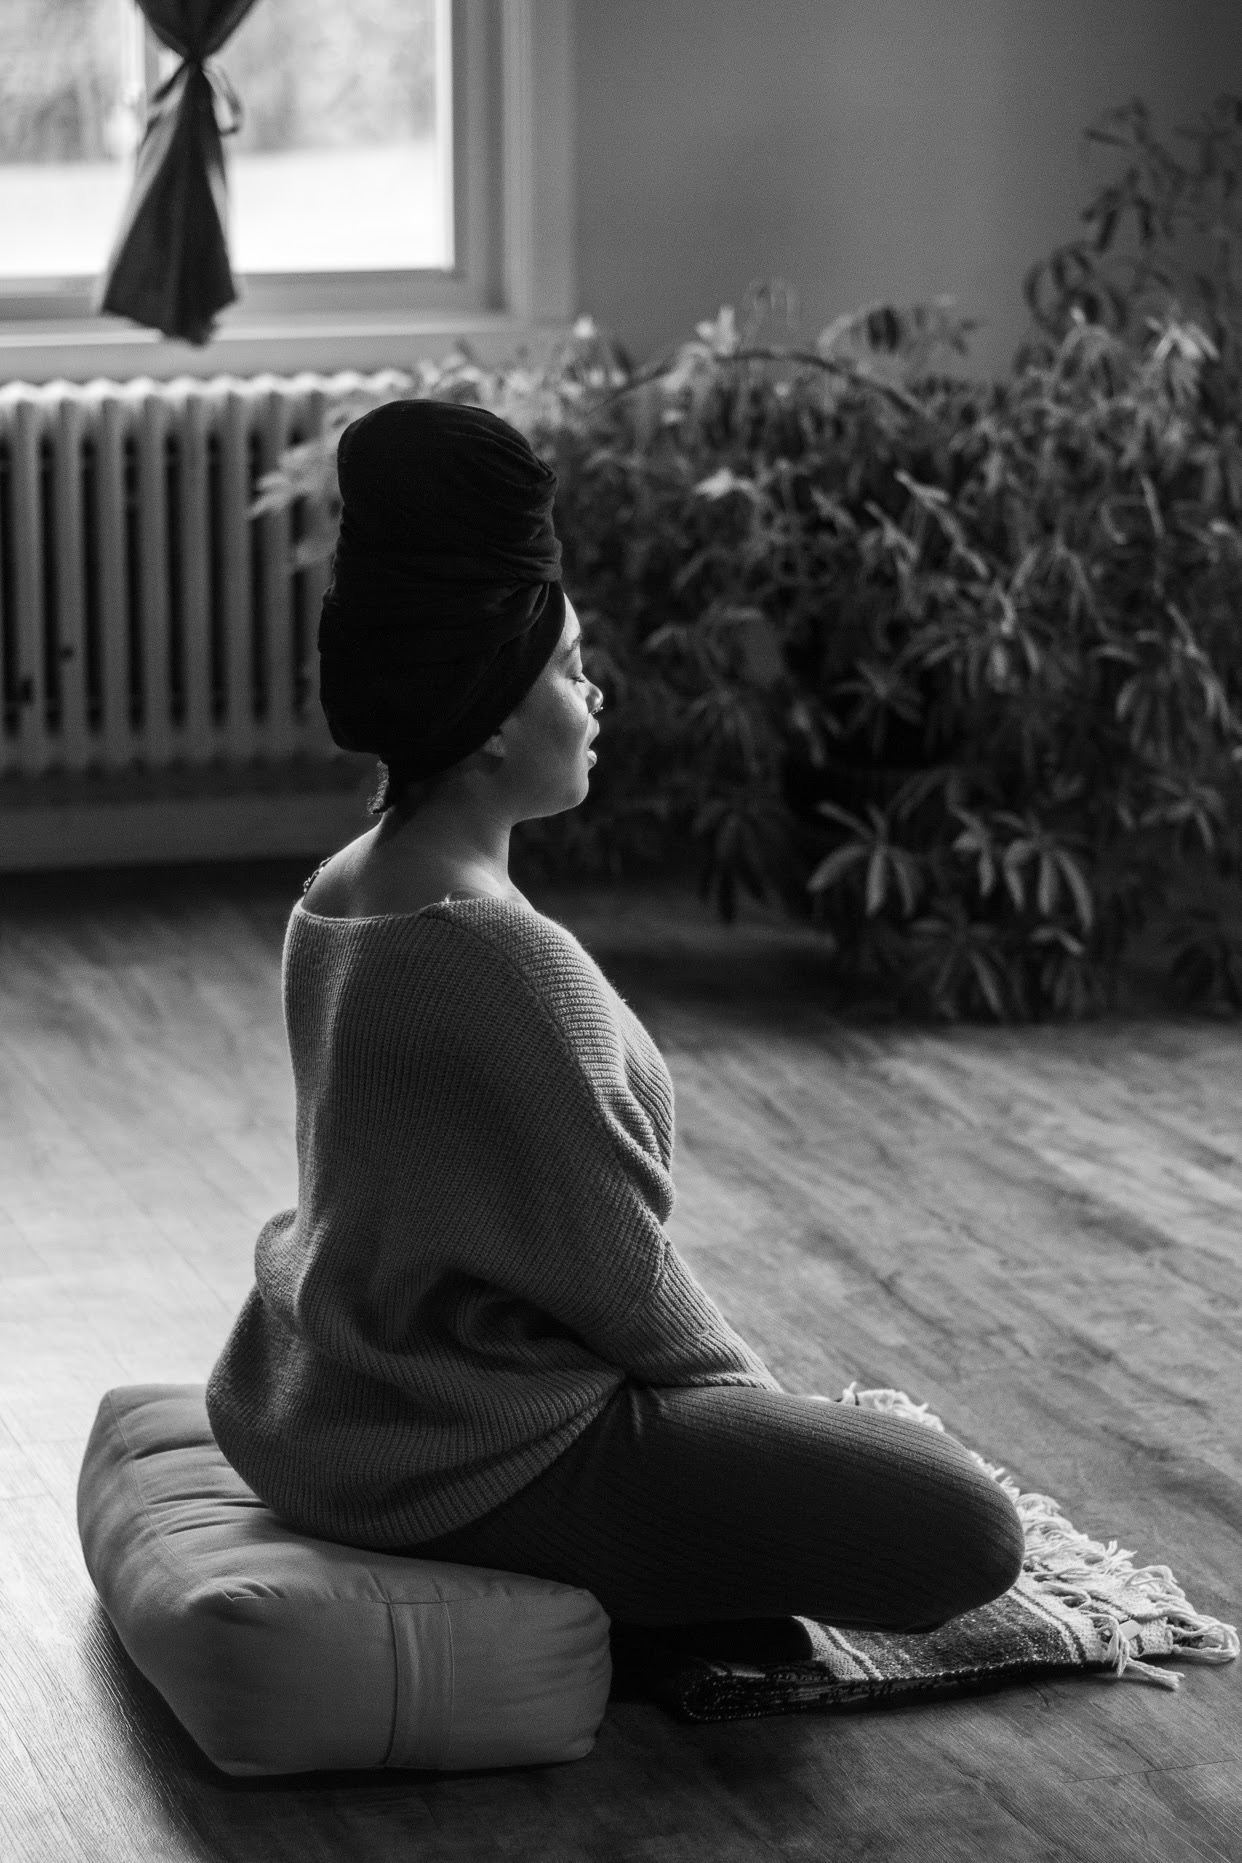 A black and white photo of a woman sitting on a yoga bolster in a meditation posture